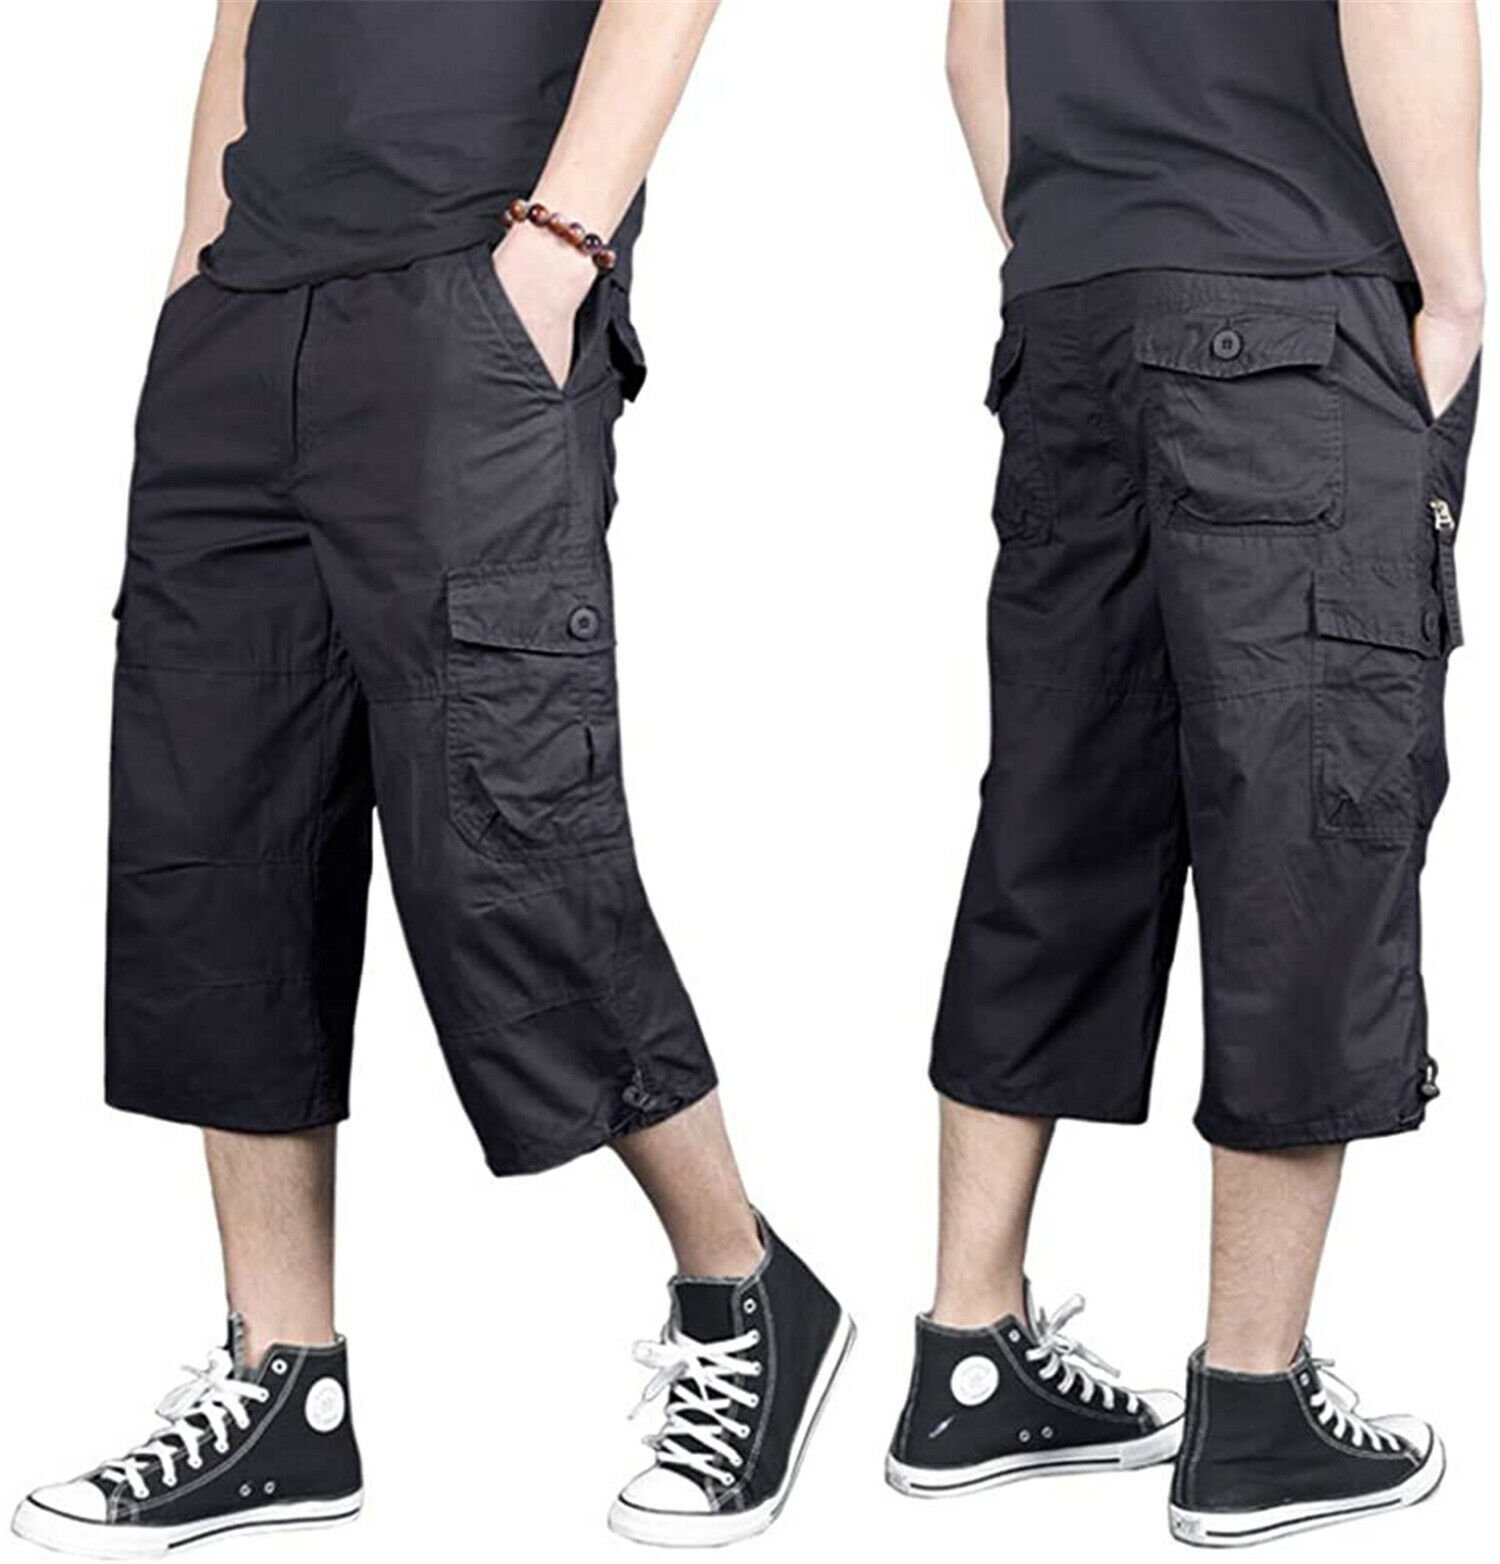 Xiktop Camouflage Straight Cargo Pants Loose Casual Style 2020